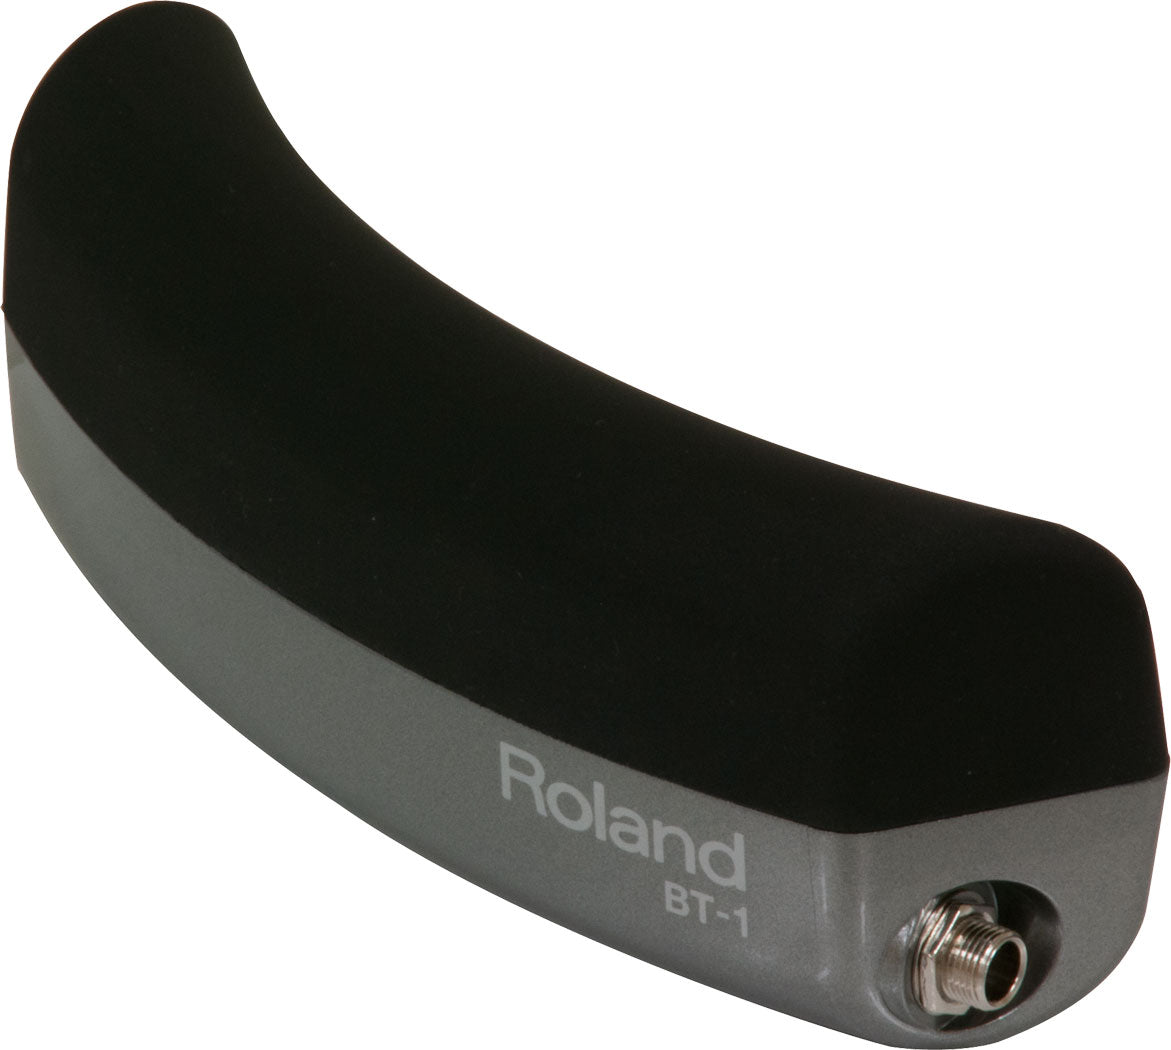 Roland BT-1 Bar Drum Trigger Pad Compact Versatile Trigger Pad for V-Pads and Acoustic Drums